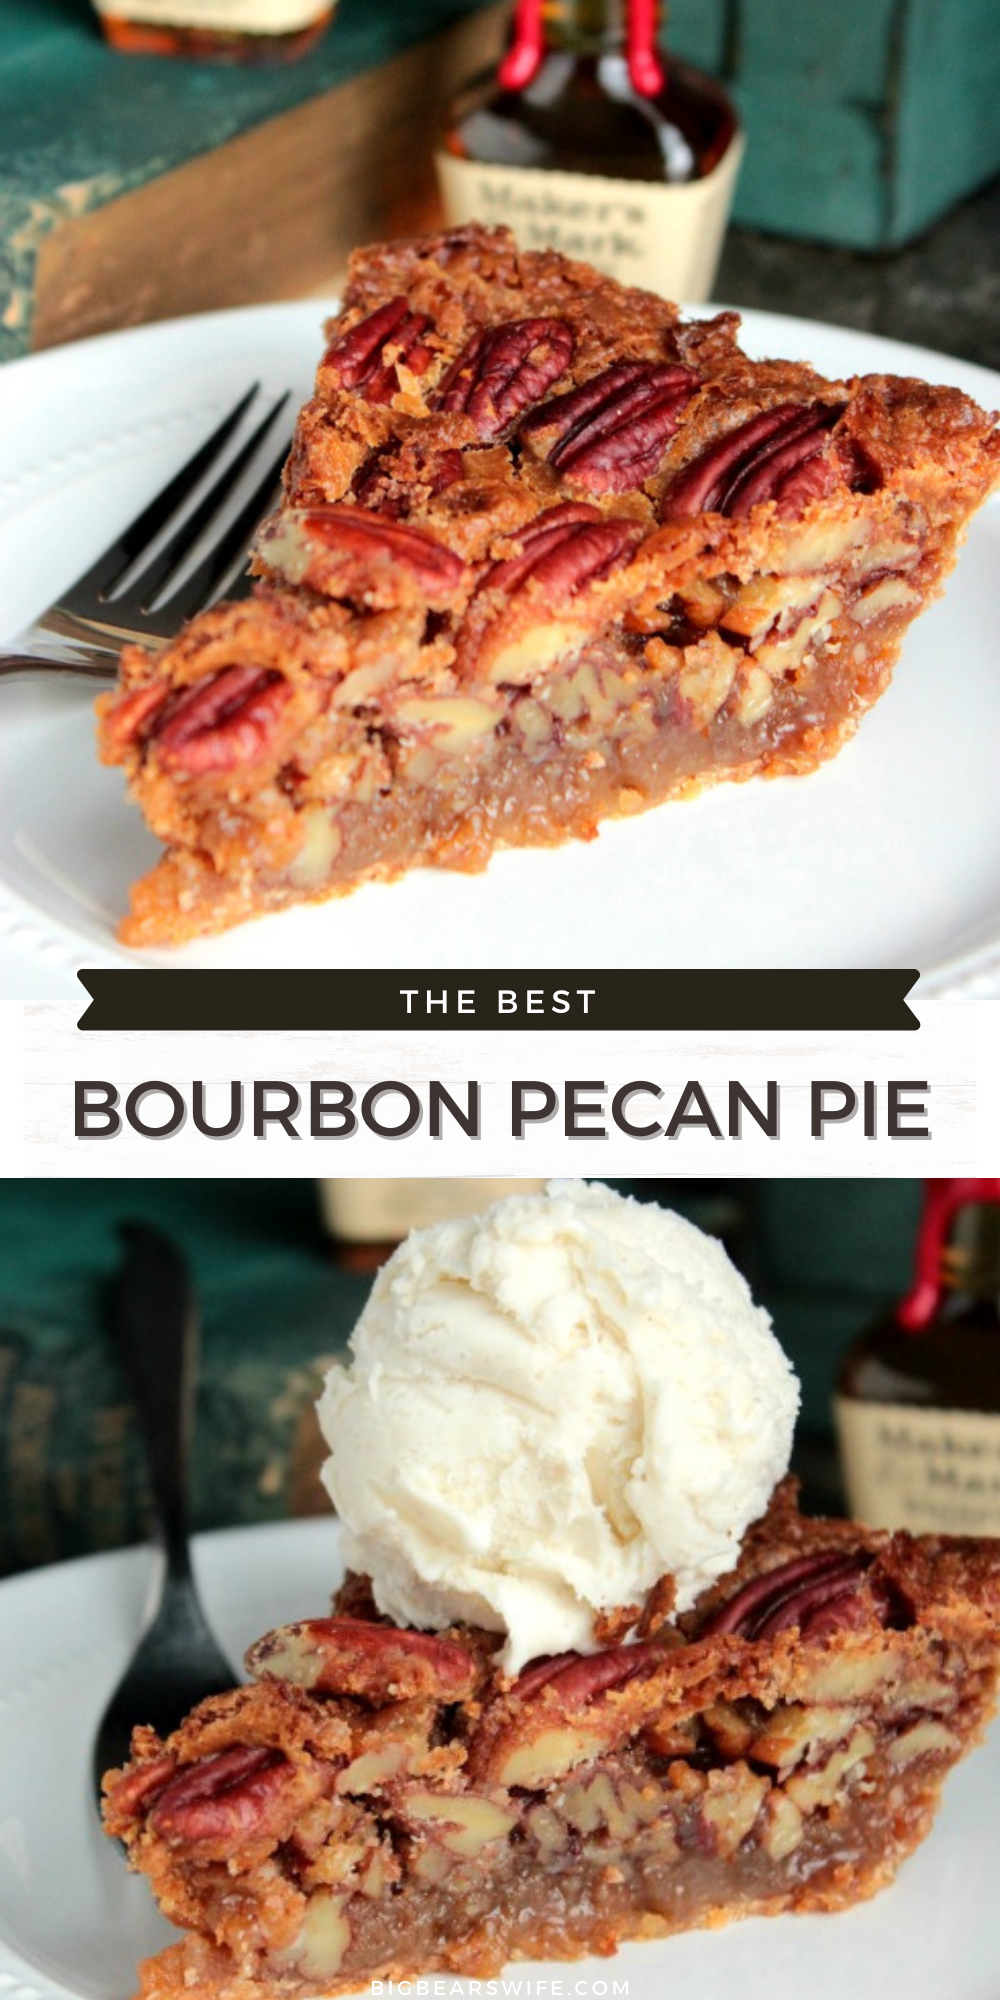 Bourbon Pecan Pie - A sweet classic southern pecan pie with the smooth touch of bourbon baked inside!
 via @bigbearswife